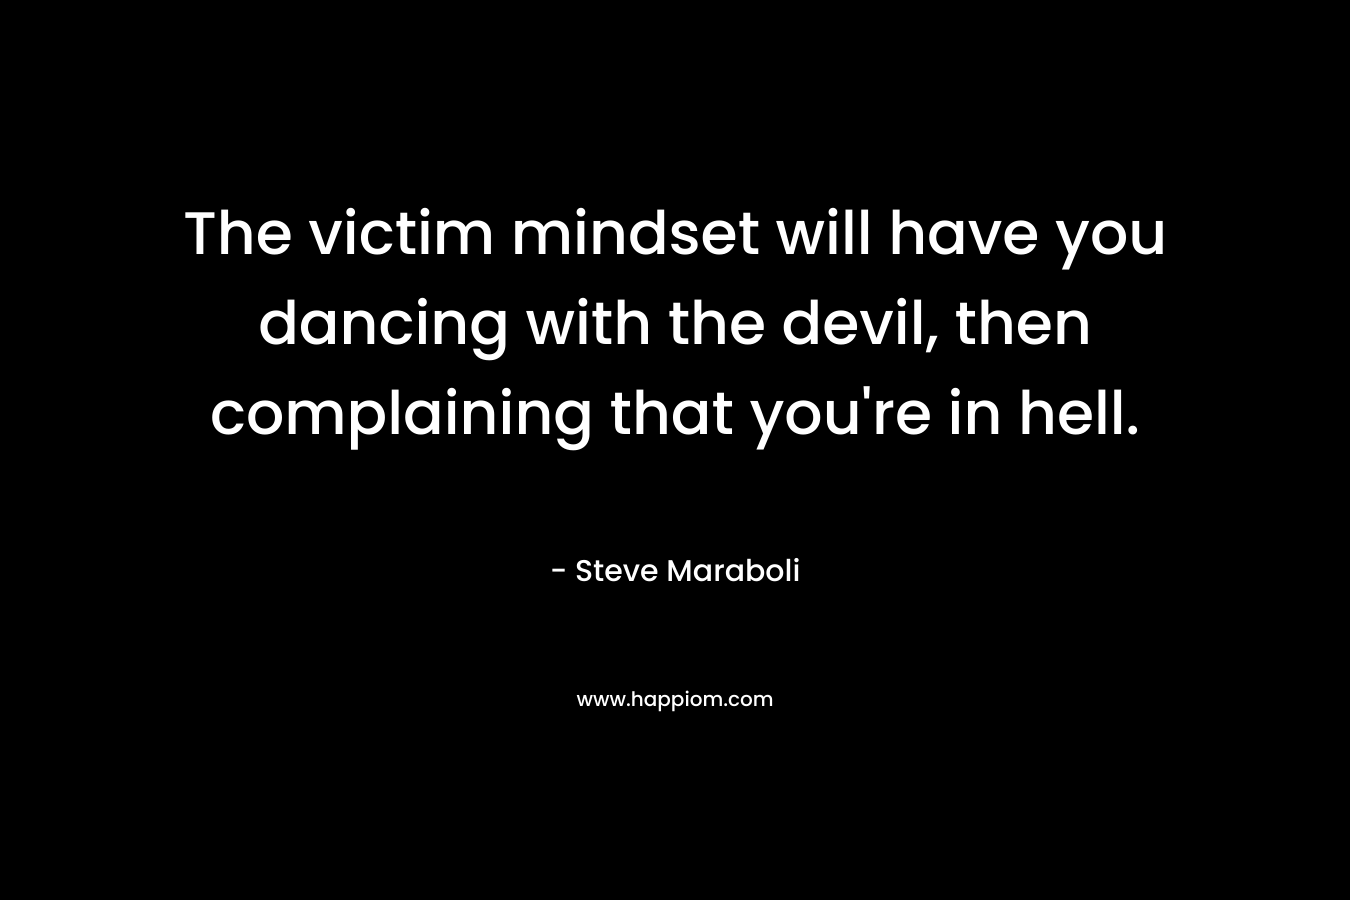 The victim mindset will have you dancing with the devil, then complaining that you're in hell.